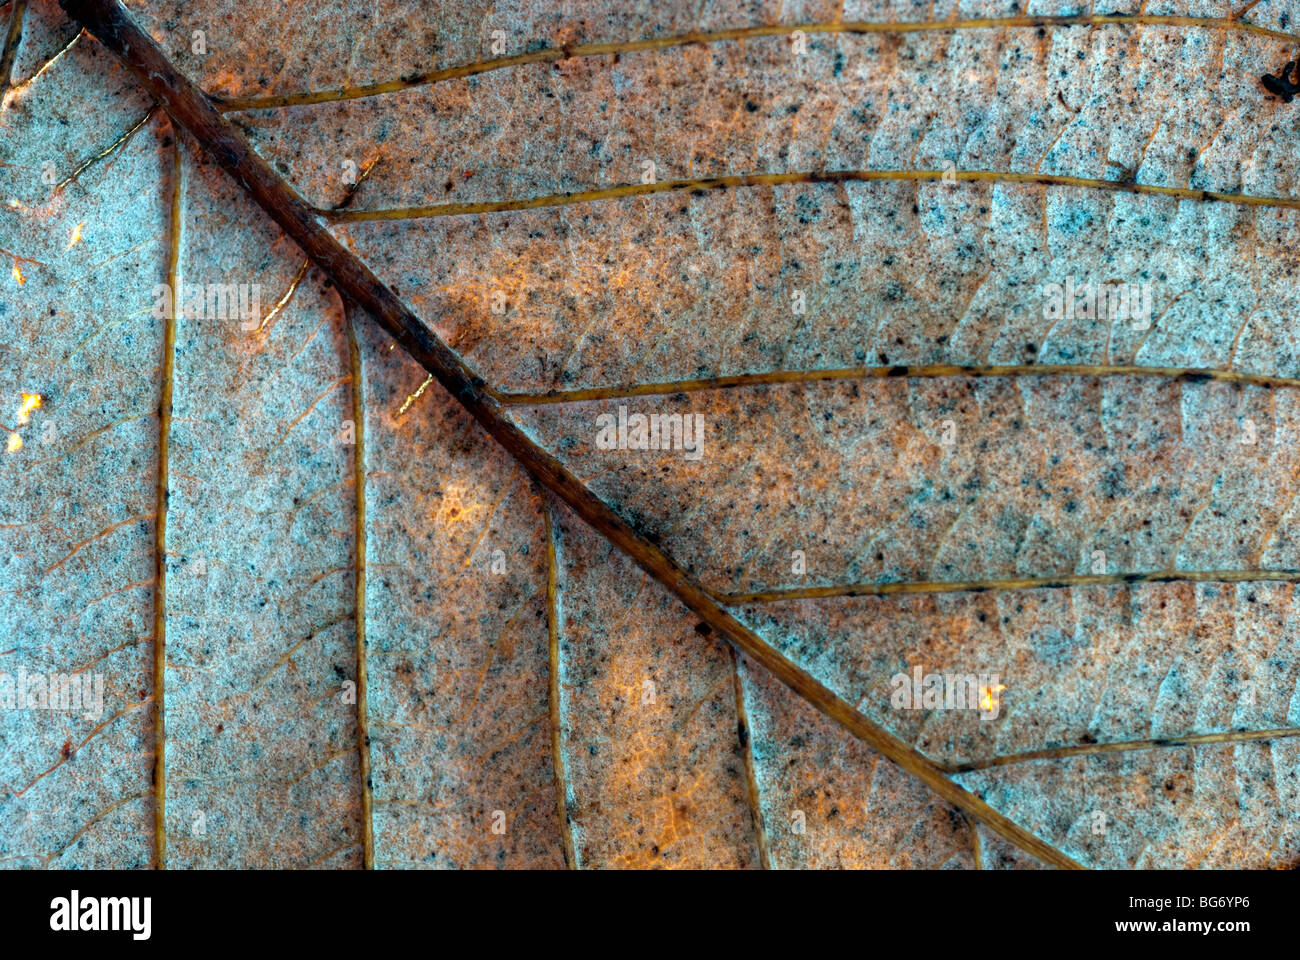 Macro image of a dead and decaying leaf. The leaf is chlorotic (lacking chlorophyll) as a natural part of the aging process Stock Photo